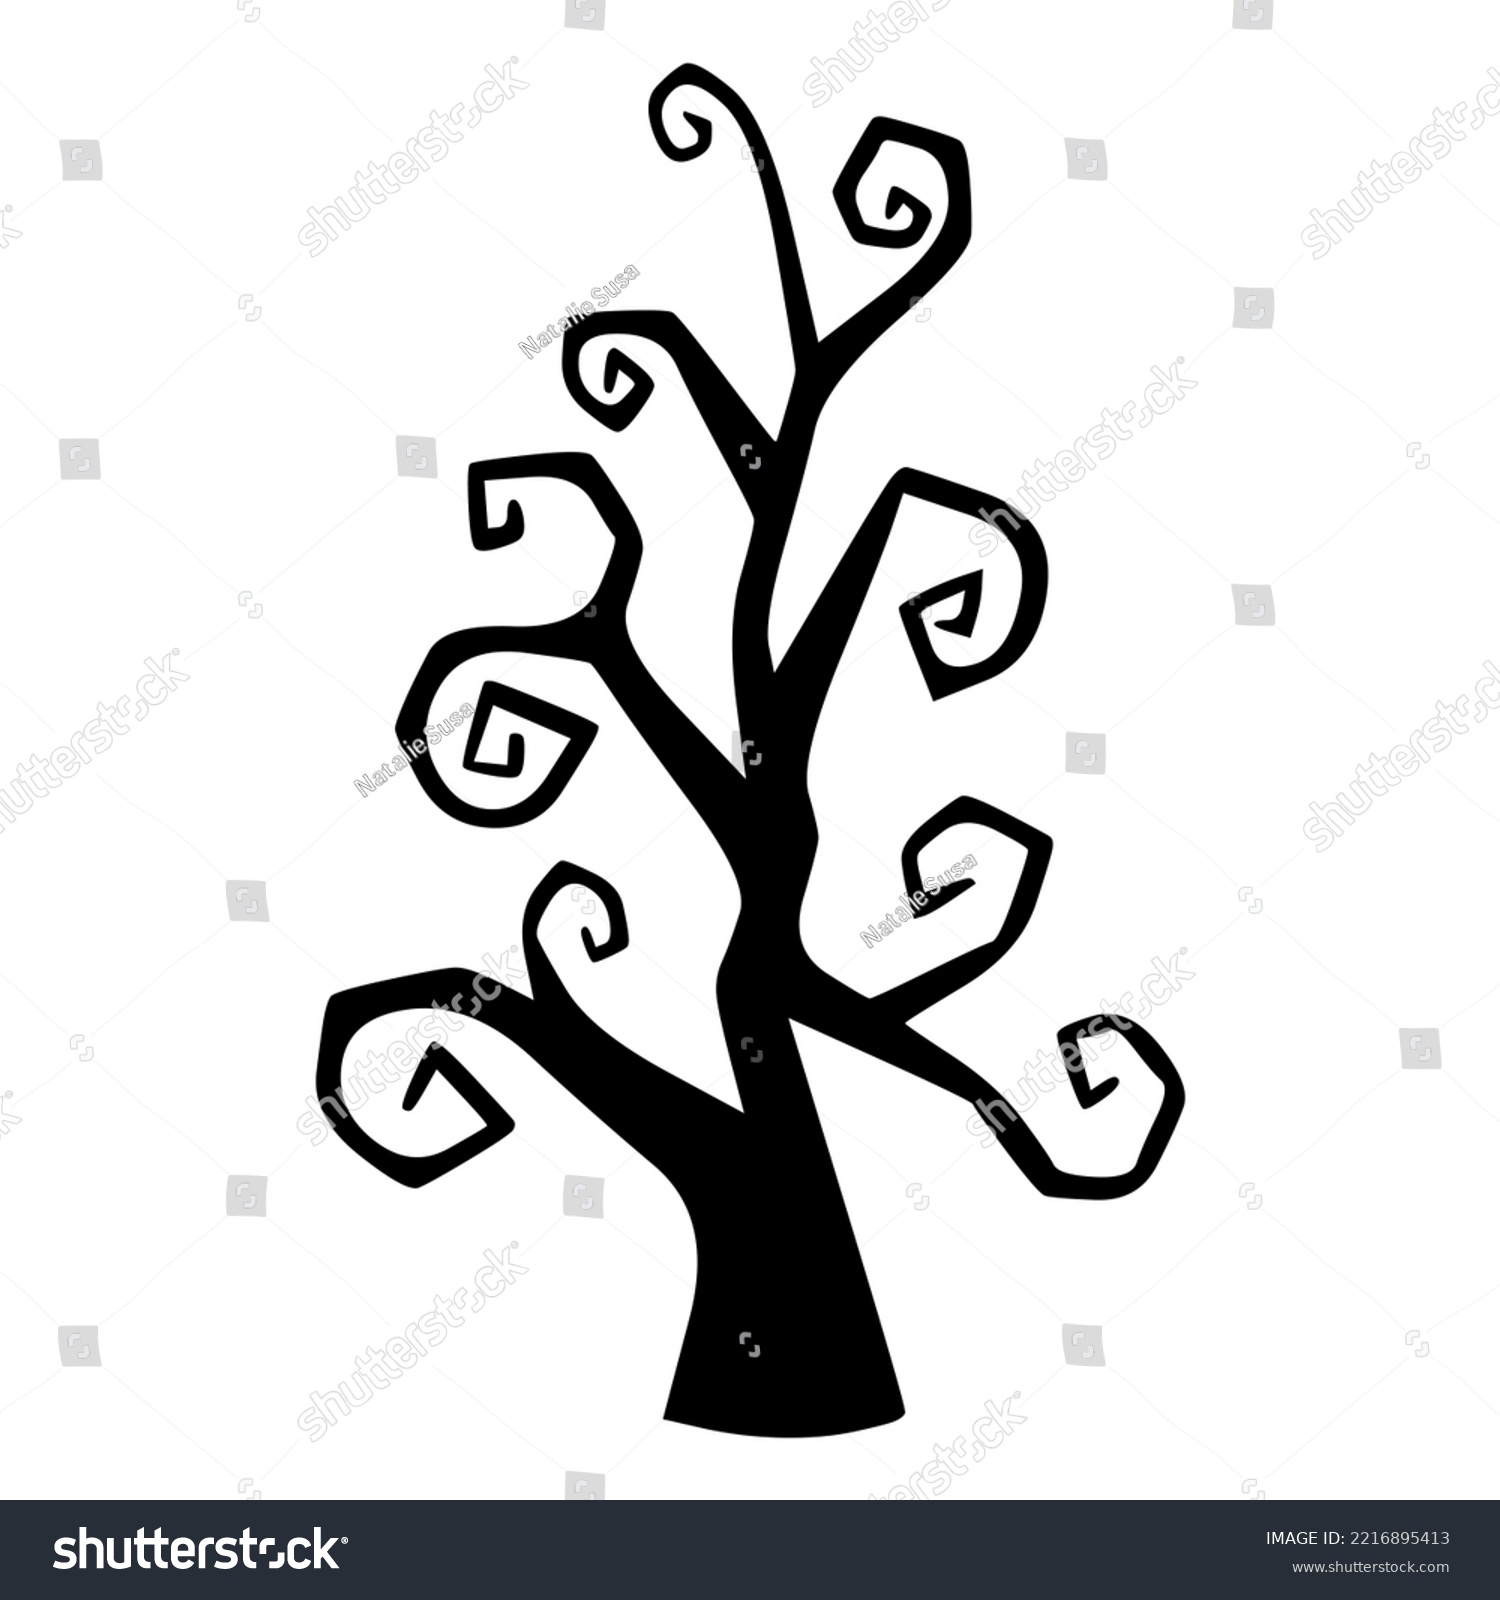 SVG of Halloween  hand drawn spooky tree silhouette. Vector doodle sketch illustration isolated on white background ready for scrapbooking and svg art. svg